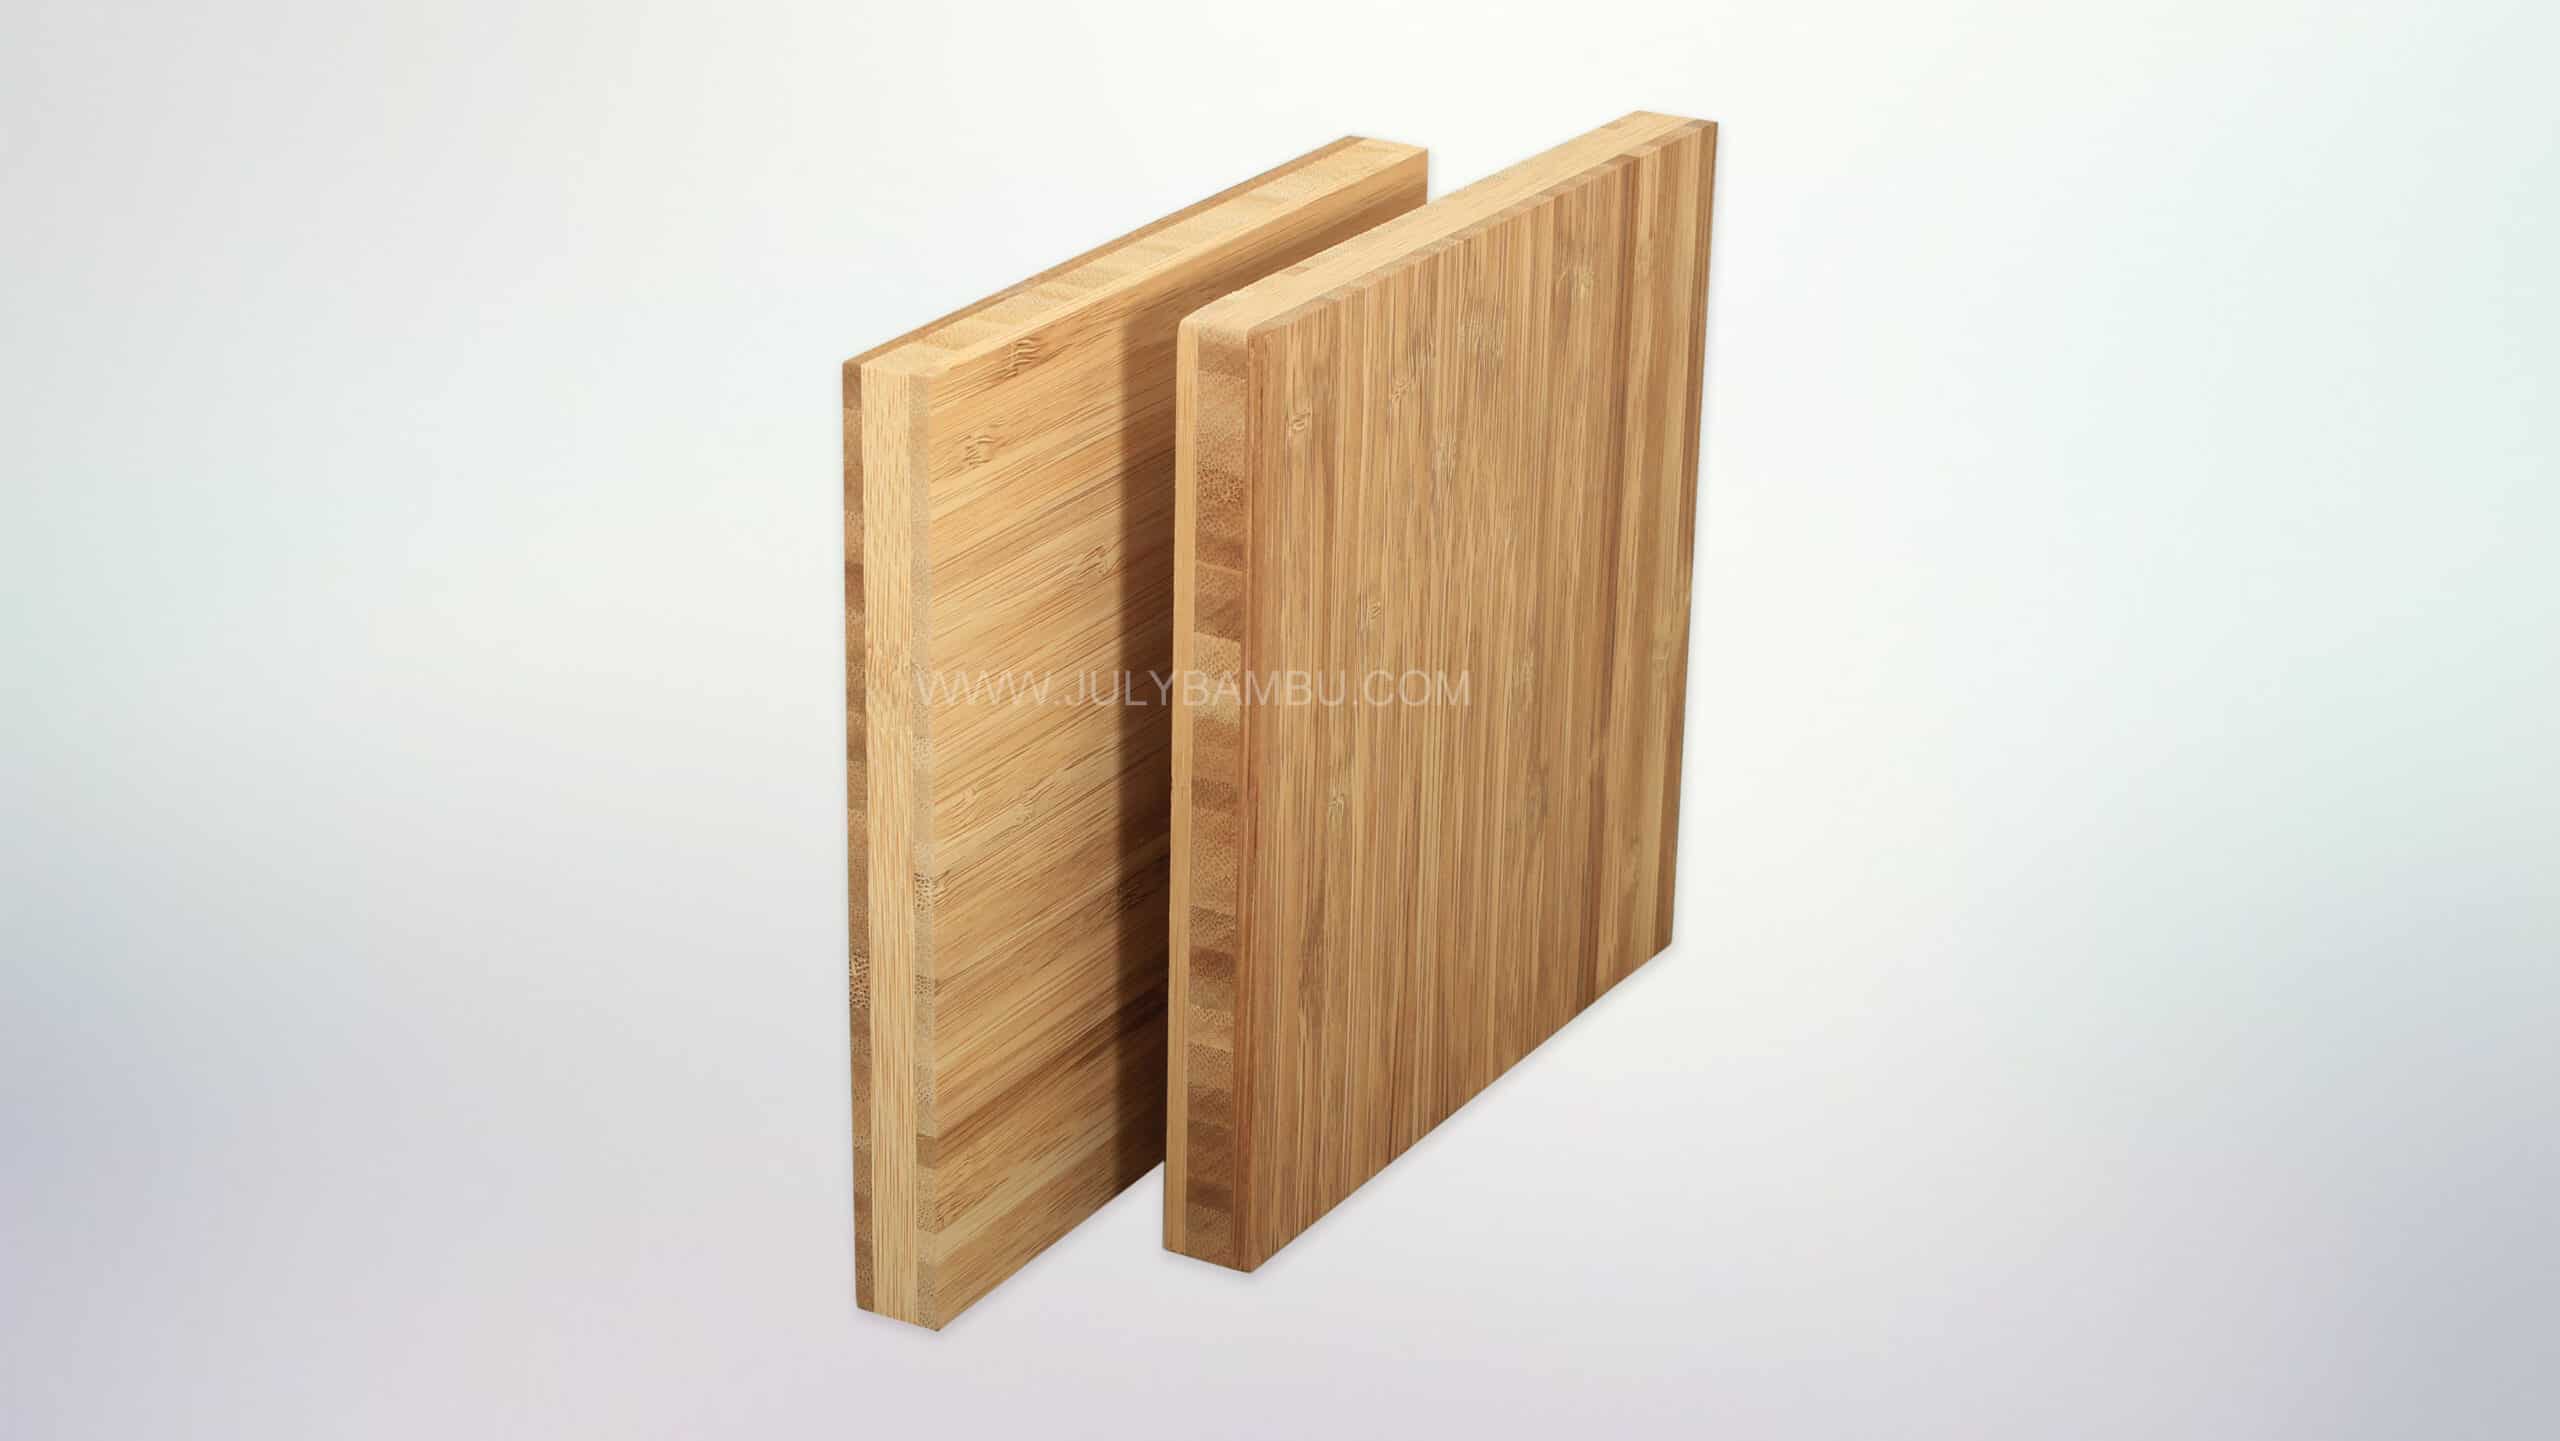 dark colour carbonized 3 layers bamboo plywood 19mm